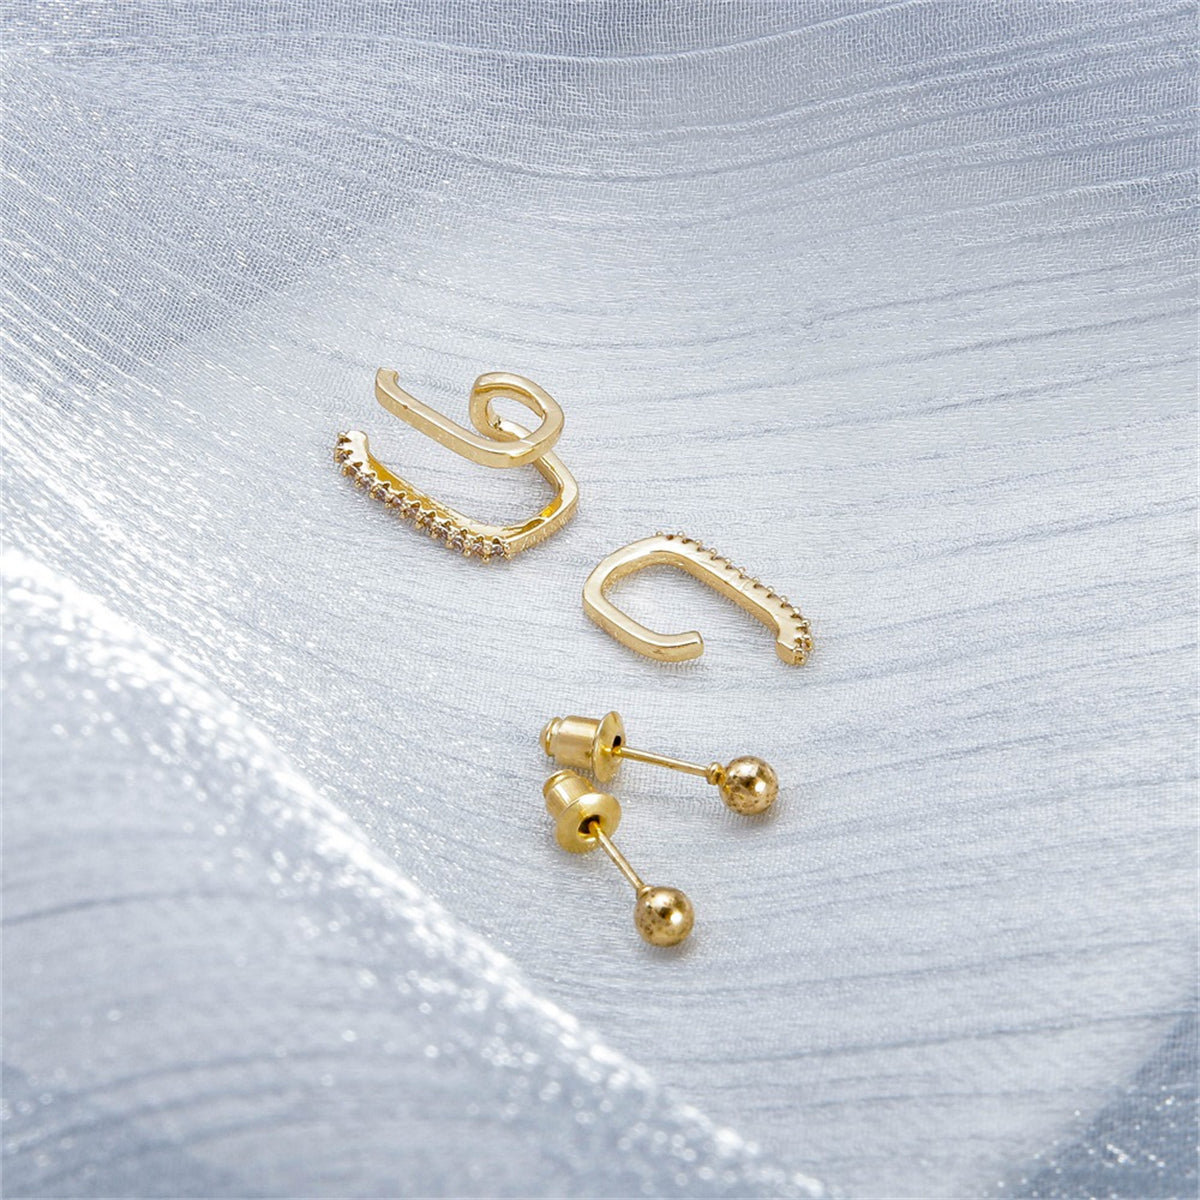 Clear Cubic Zirconia & 18K Gold-Plated Bead Four-Piece Stud & Ear Cuff Set